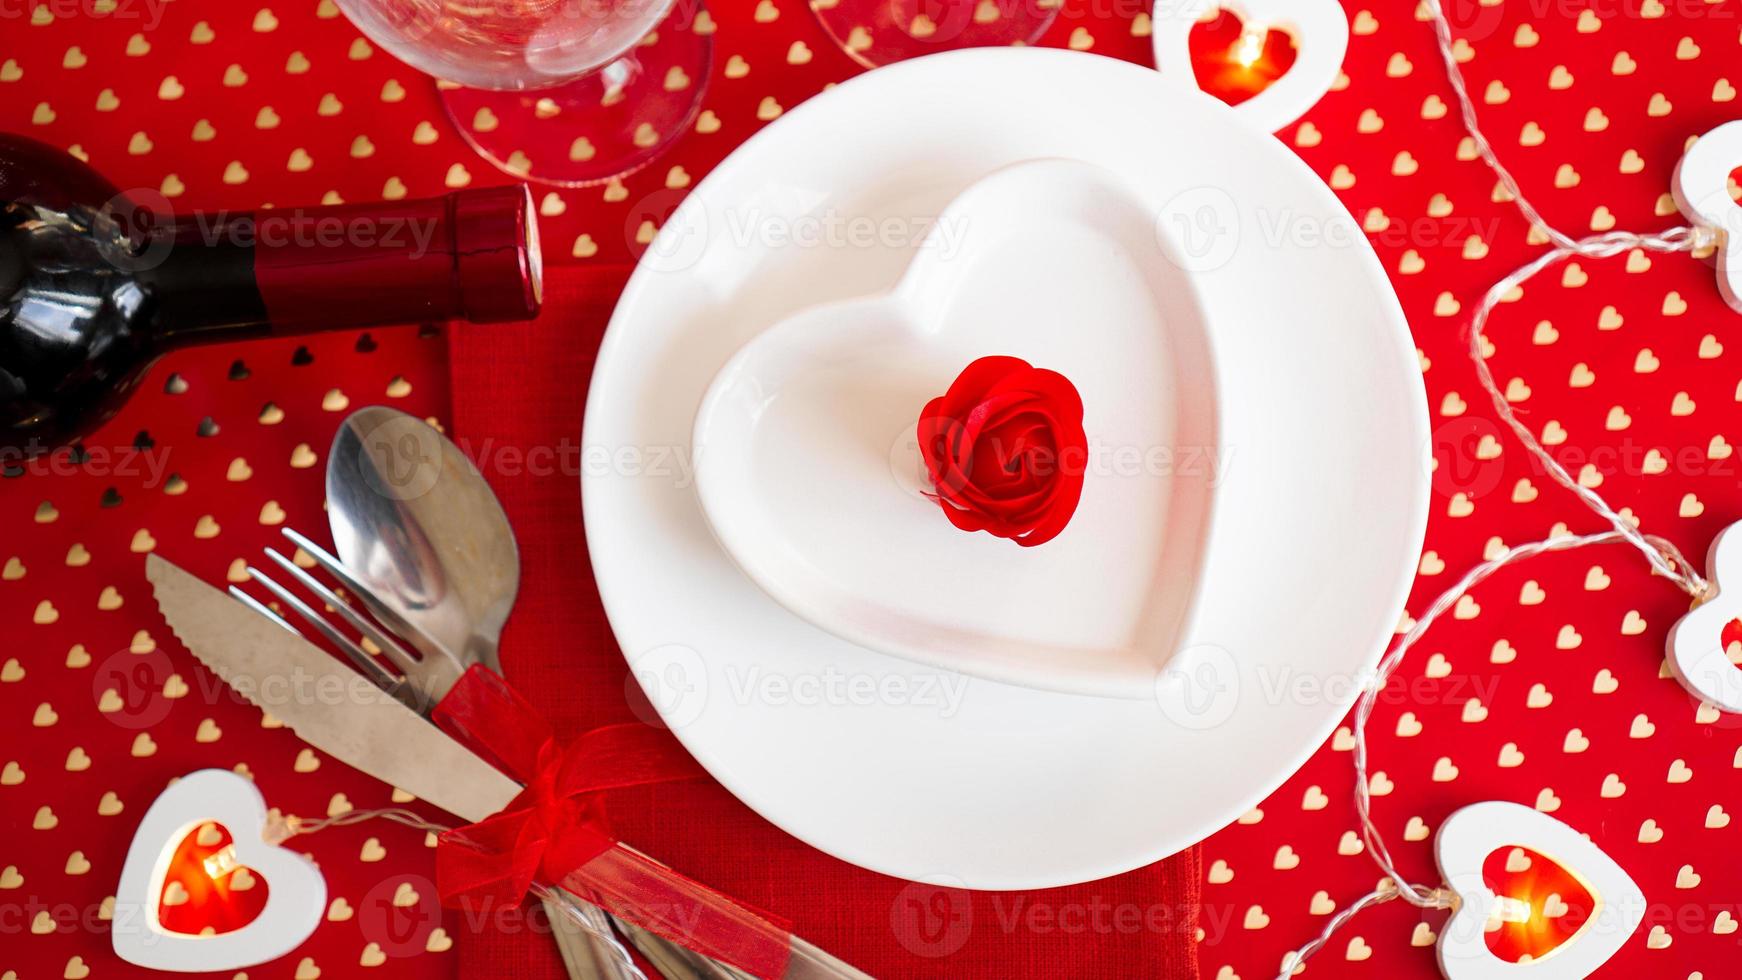 A white plate with a knife and fork on a bright red photo